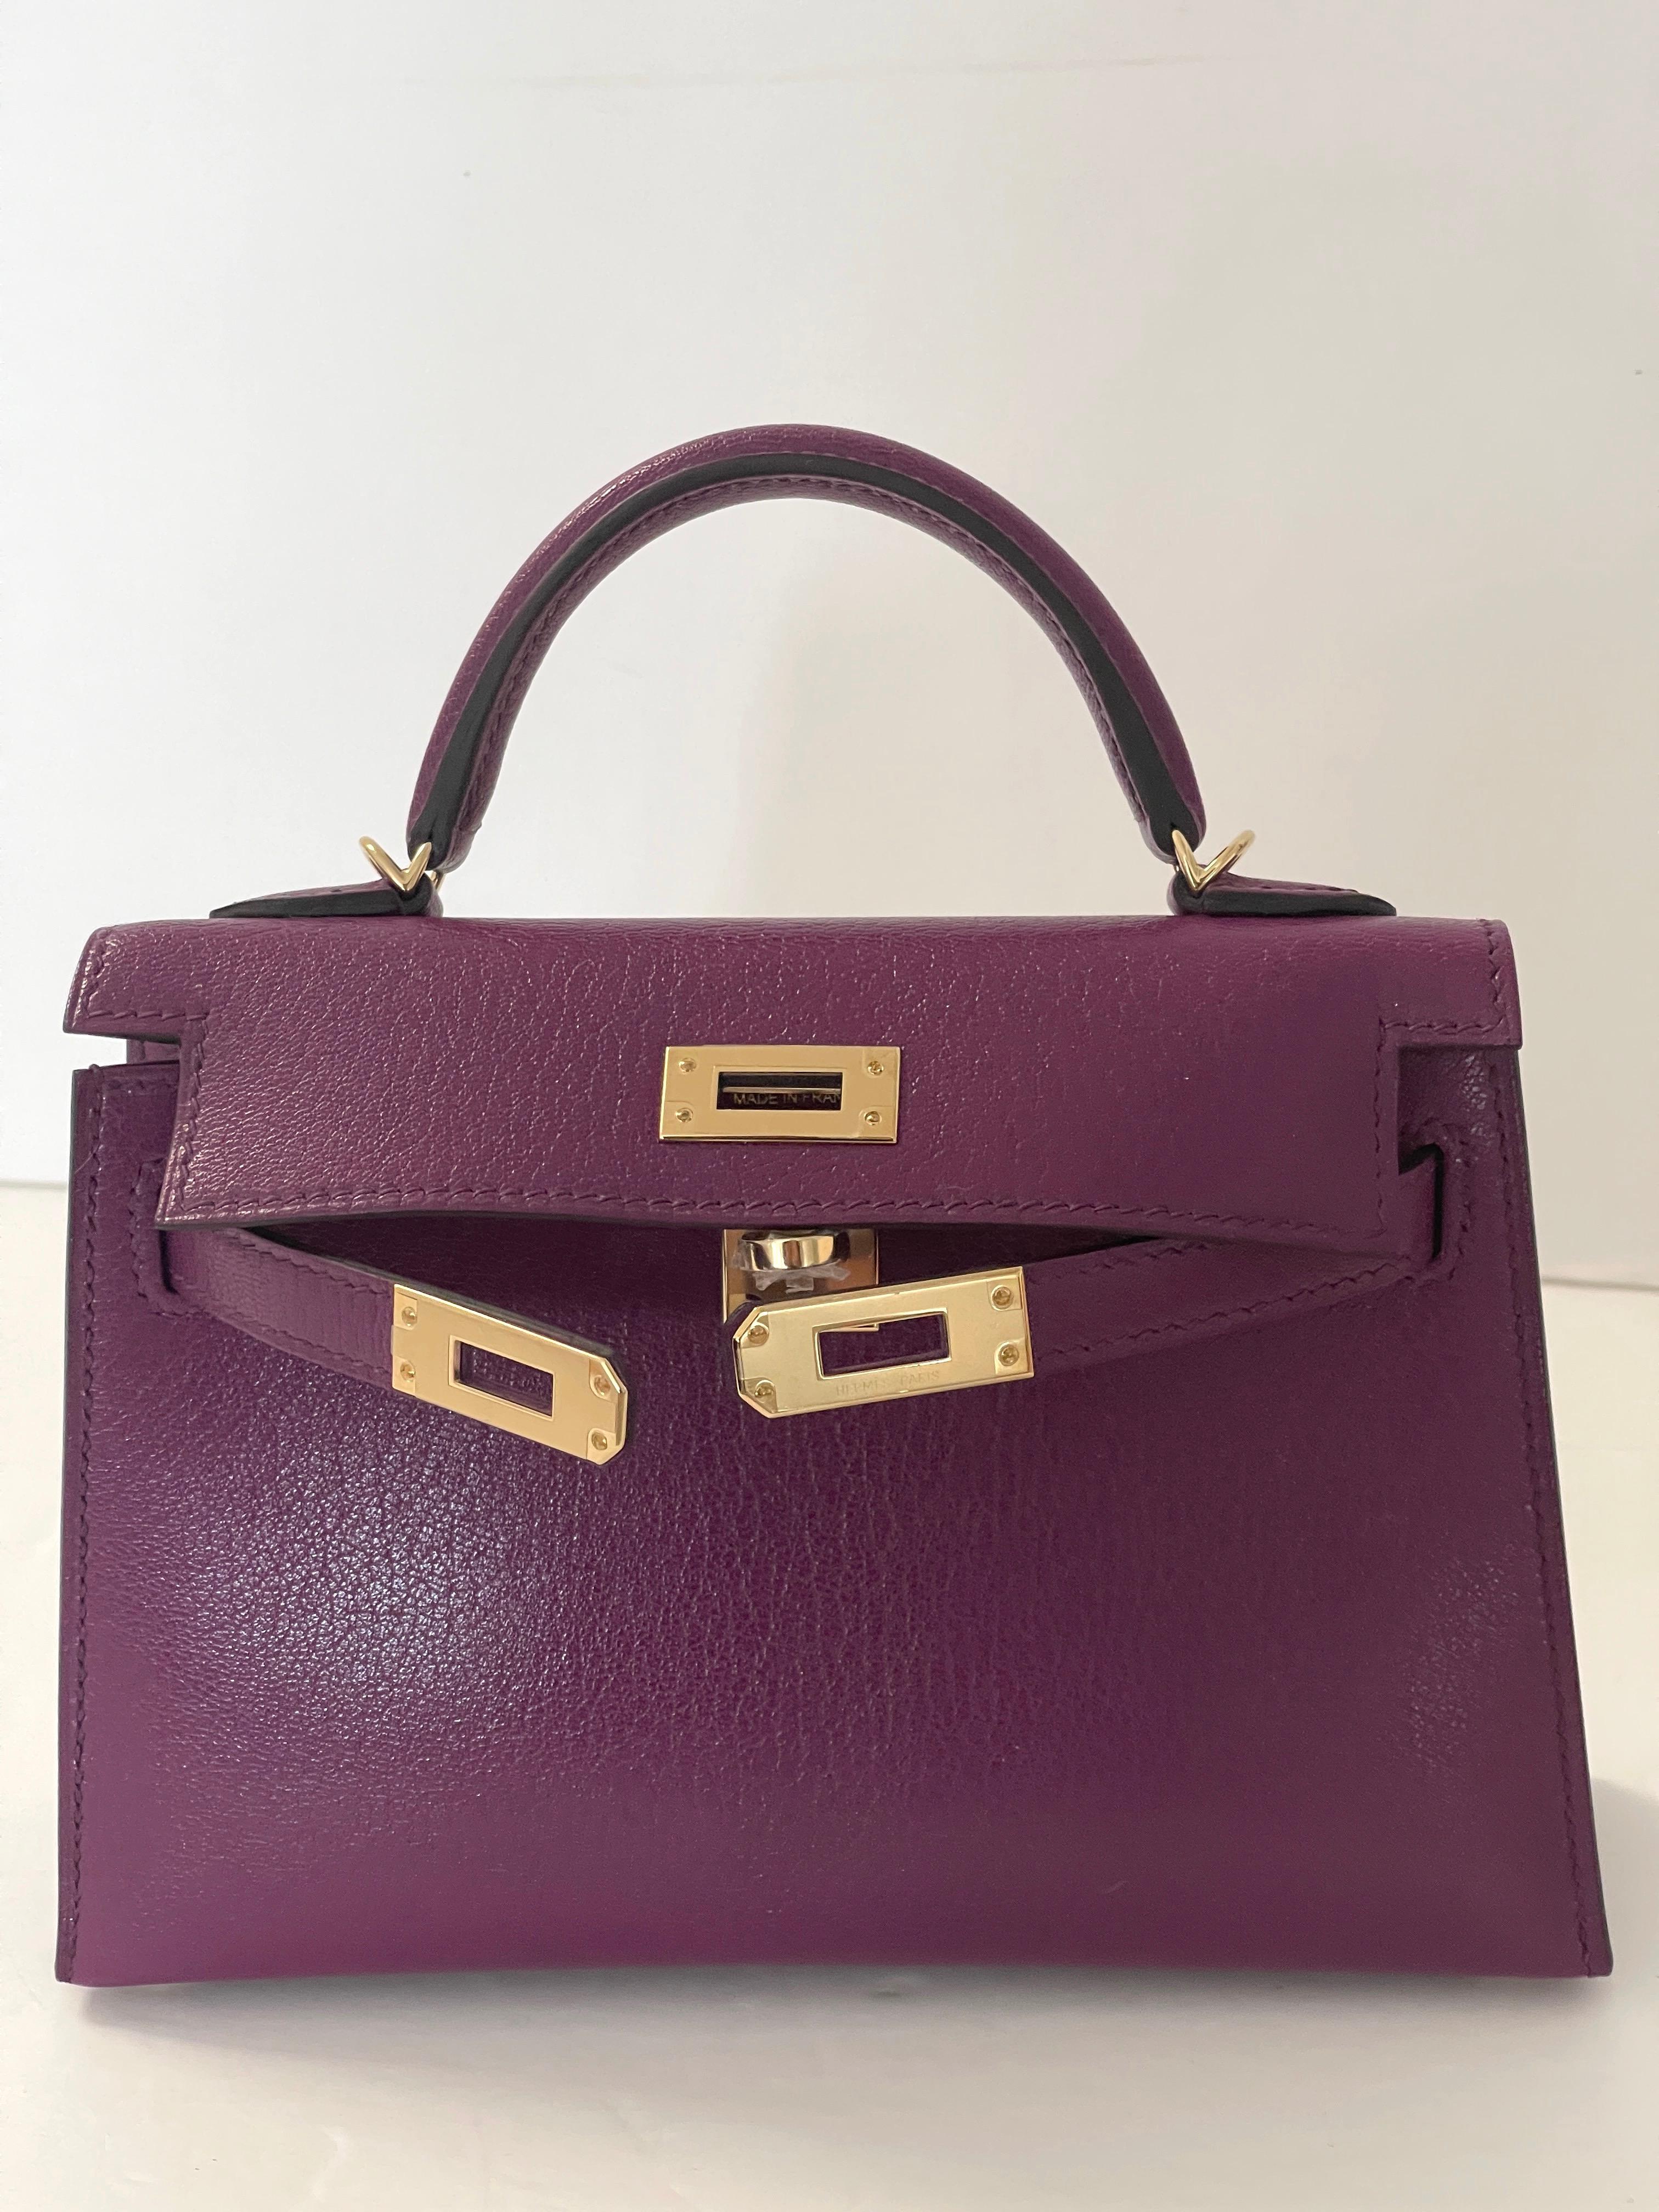 This Kelly, in the Sellier style, is in Anemone Chevre with permabrass hardware and has tonal stitching, two straps with front toggle closure, clochette with lock and two keys, single rolled handle and removable shoulder strap.
Anemone, a beautiful